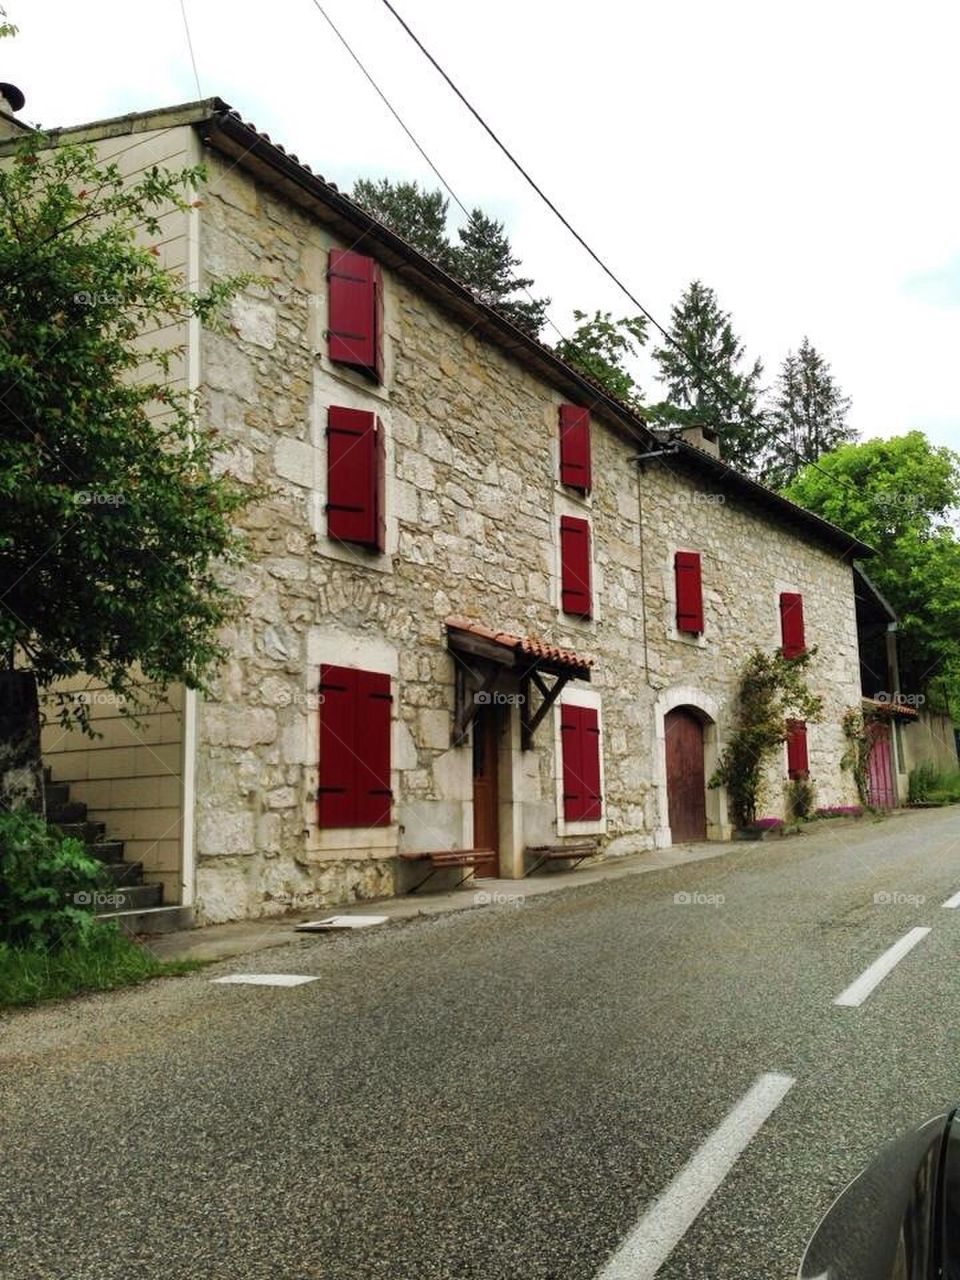 Southern France red door house